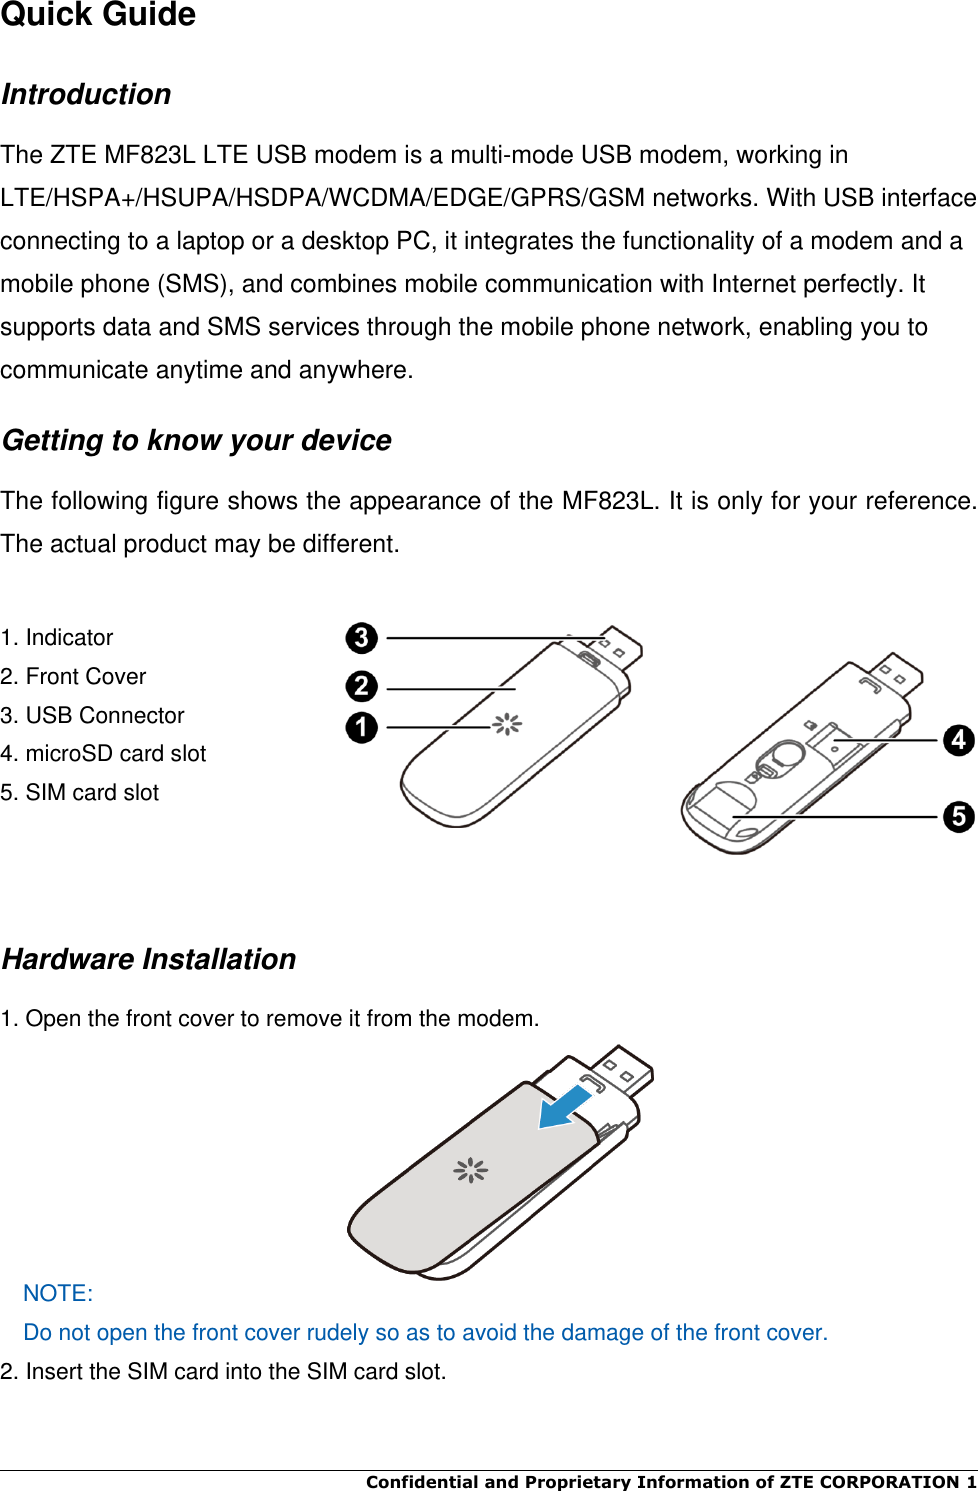  Confidential and Proprietary Information of ZTE CORPORATION 1    Quick Guide Introduction The ZTE MF823L LTE USB modem is a multi-mode USB modem, working in LTE/HSPA+/HSUPA/HSDPA/WCDMA/EDGE/GPRS/GSM networks. With USB interface connecting to a laptop or a desktop PC, it integrates the functionality of a modem and a mobile phone (SMS), and combines mobile communication with Internet perfectly. It supports data and SMS services through the mobile phone network, enabling you to communicate anytime and anywhere. Getting to know your device The following figure shows the appearance of the MF823L. It is only for your reference. The actual product may be different.  1. Indicator     2. Front Cover      3. USB Connector   4. microSD card slot 5. SIM card slot    Hardware Installation 1. Open the front cover to remove it from the modem.    NOTE: Do not open the front cover rudely so as to avoid the damage of the front cover.   2. Insert the SIM card into the SIM card slot.  